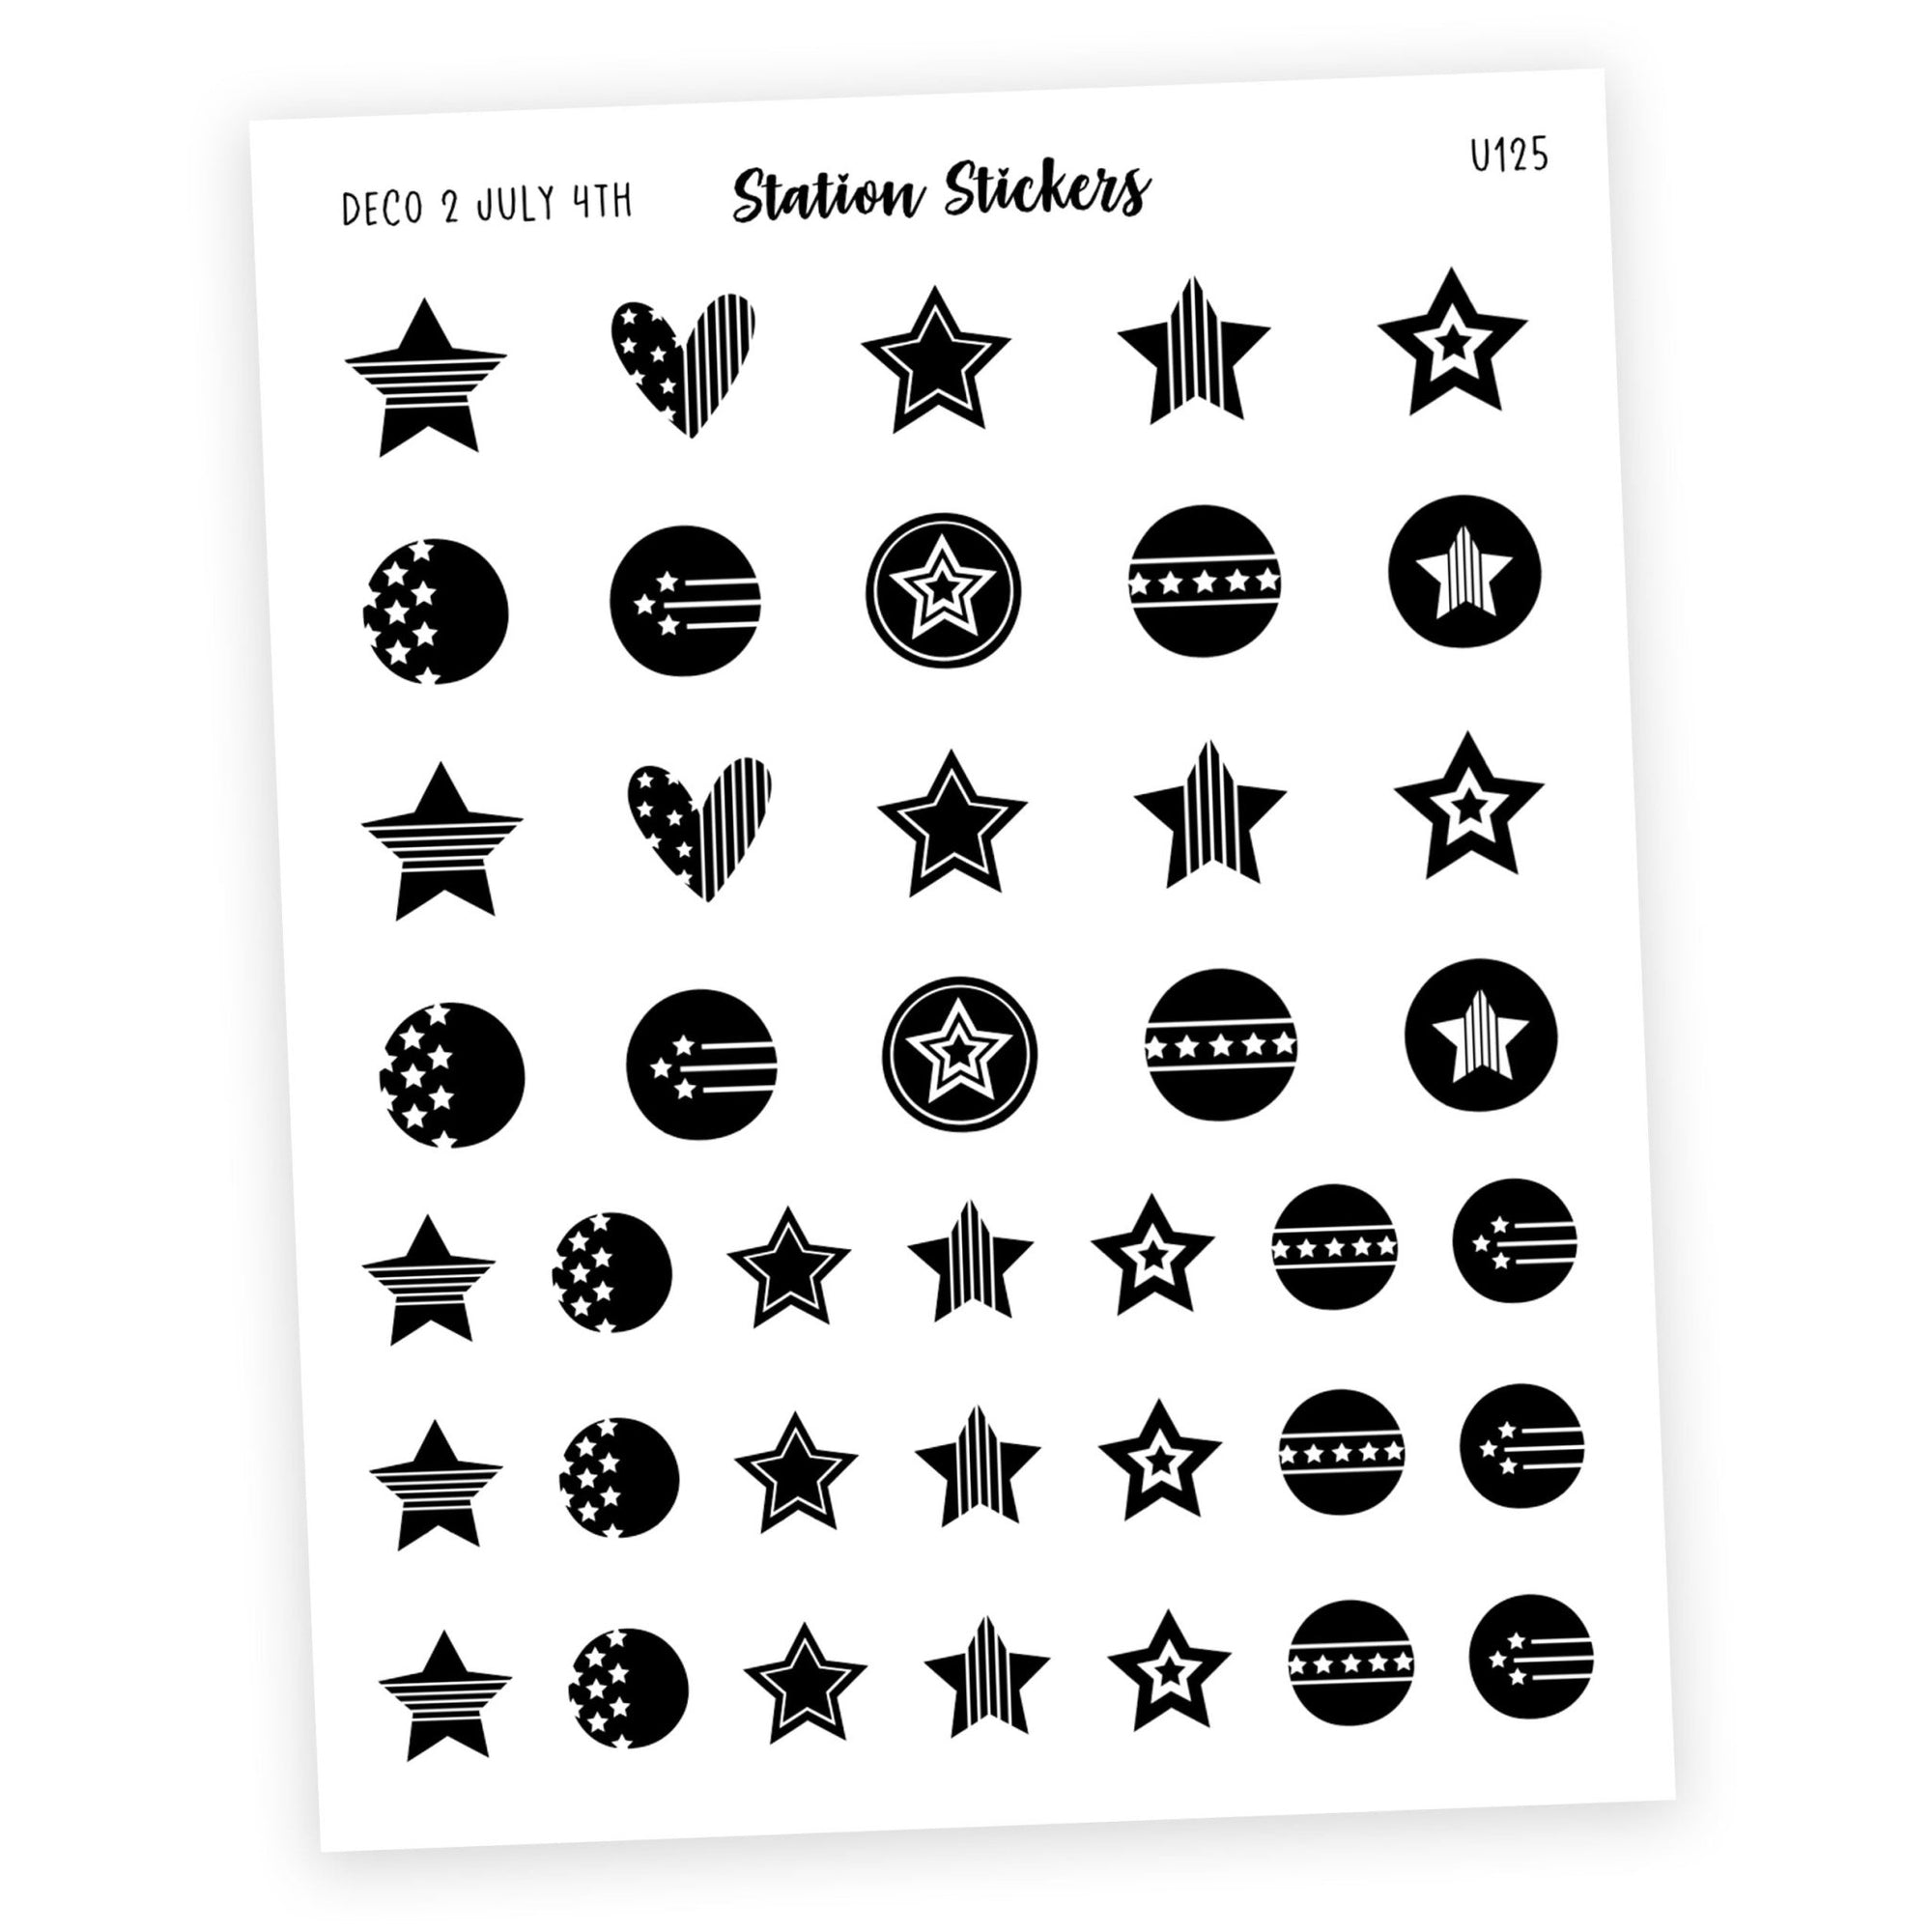 DECO 2 • JULY 4th - Station Stickers